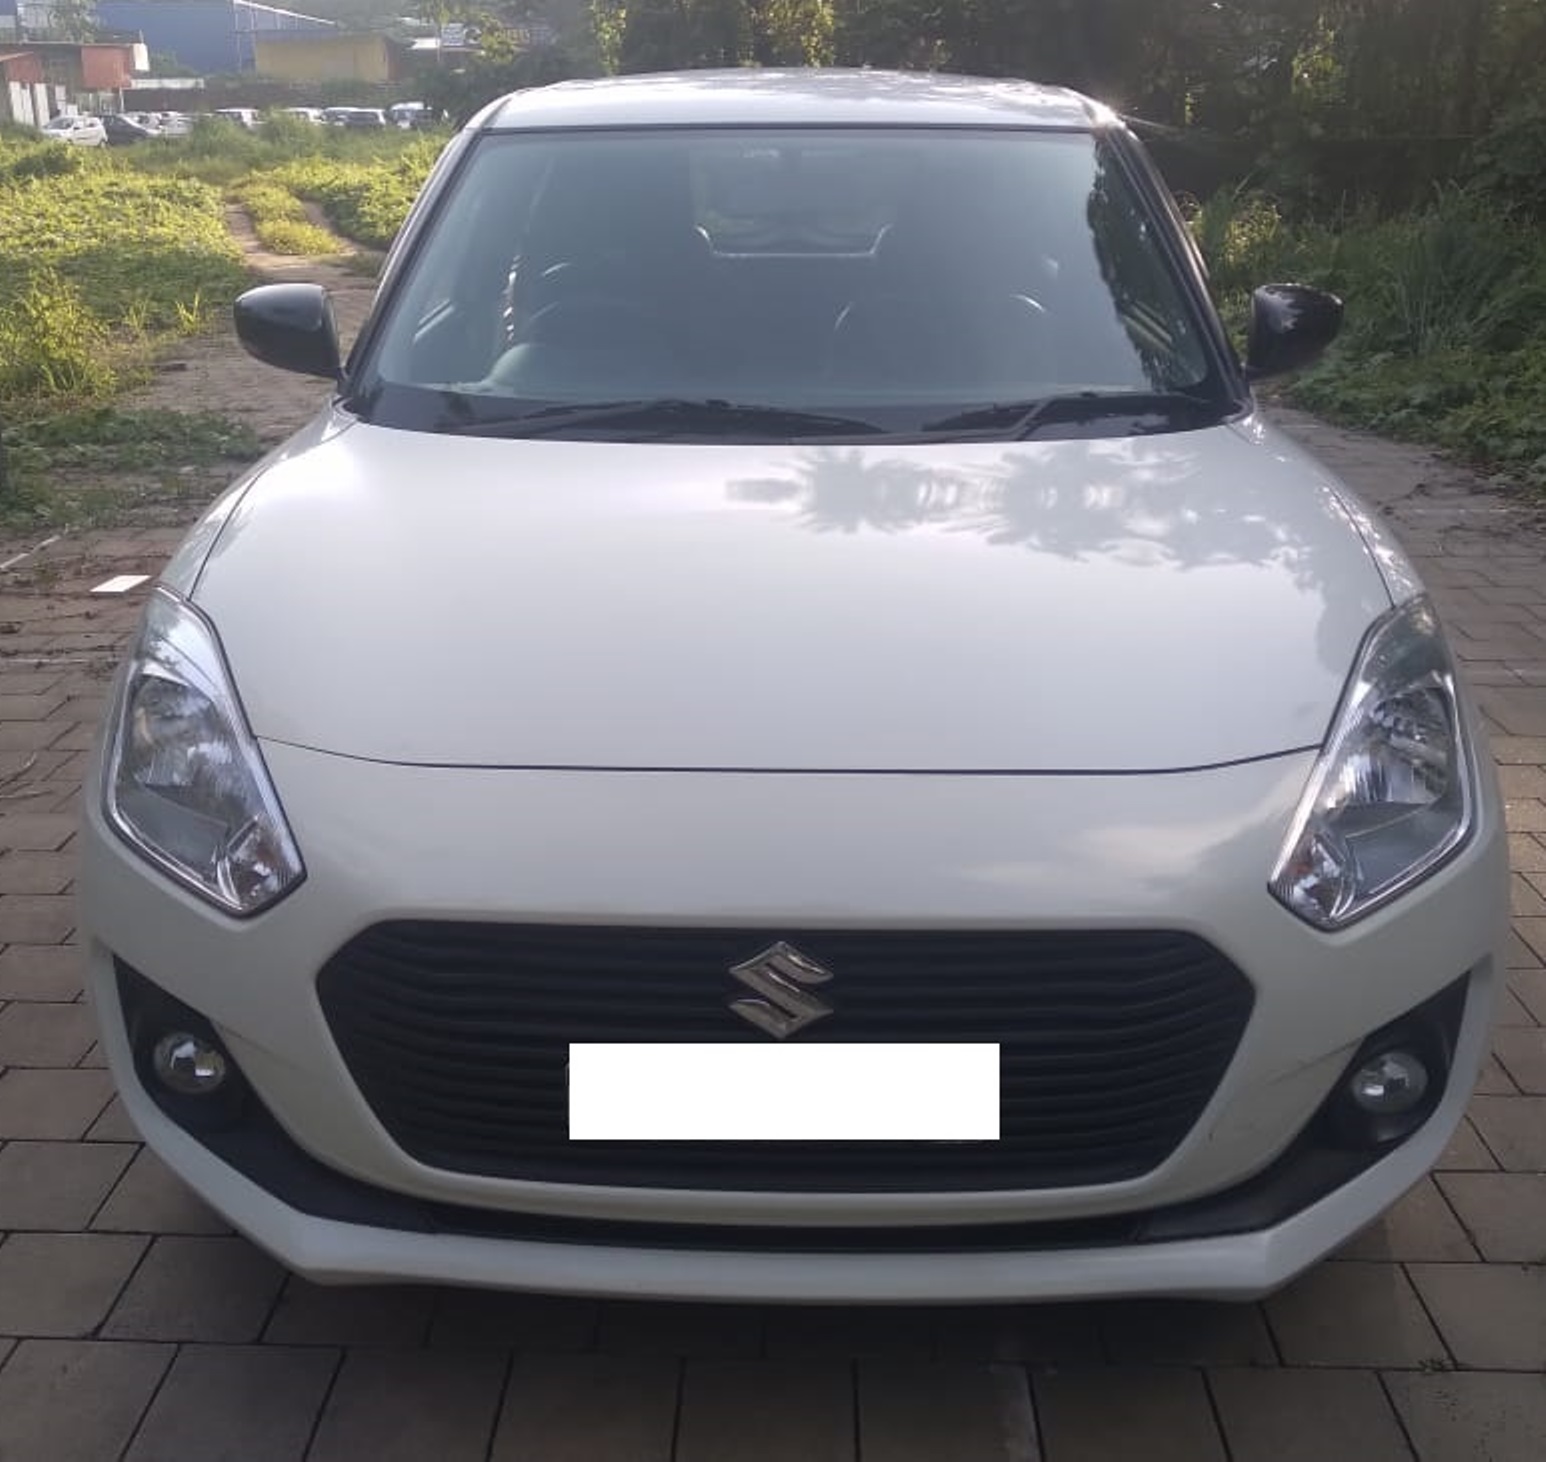 MARUTI SWIFT 2019 Second-hand Car for Sale in Kannur